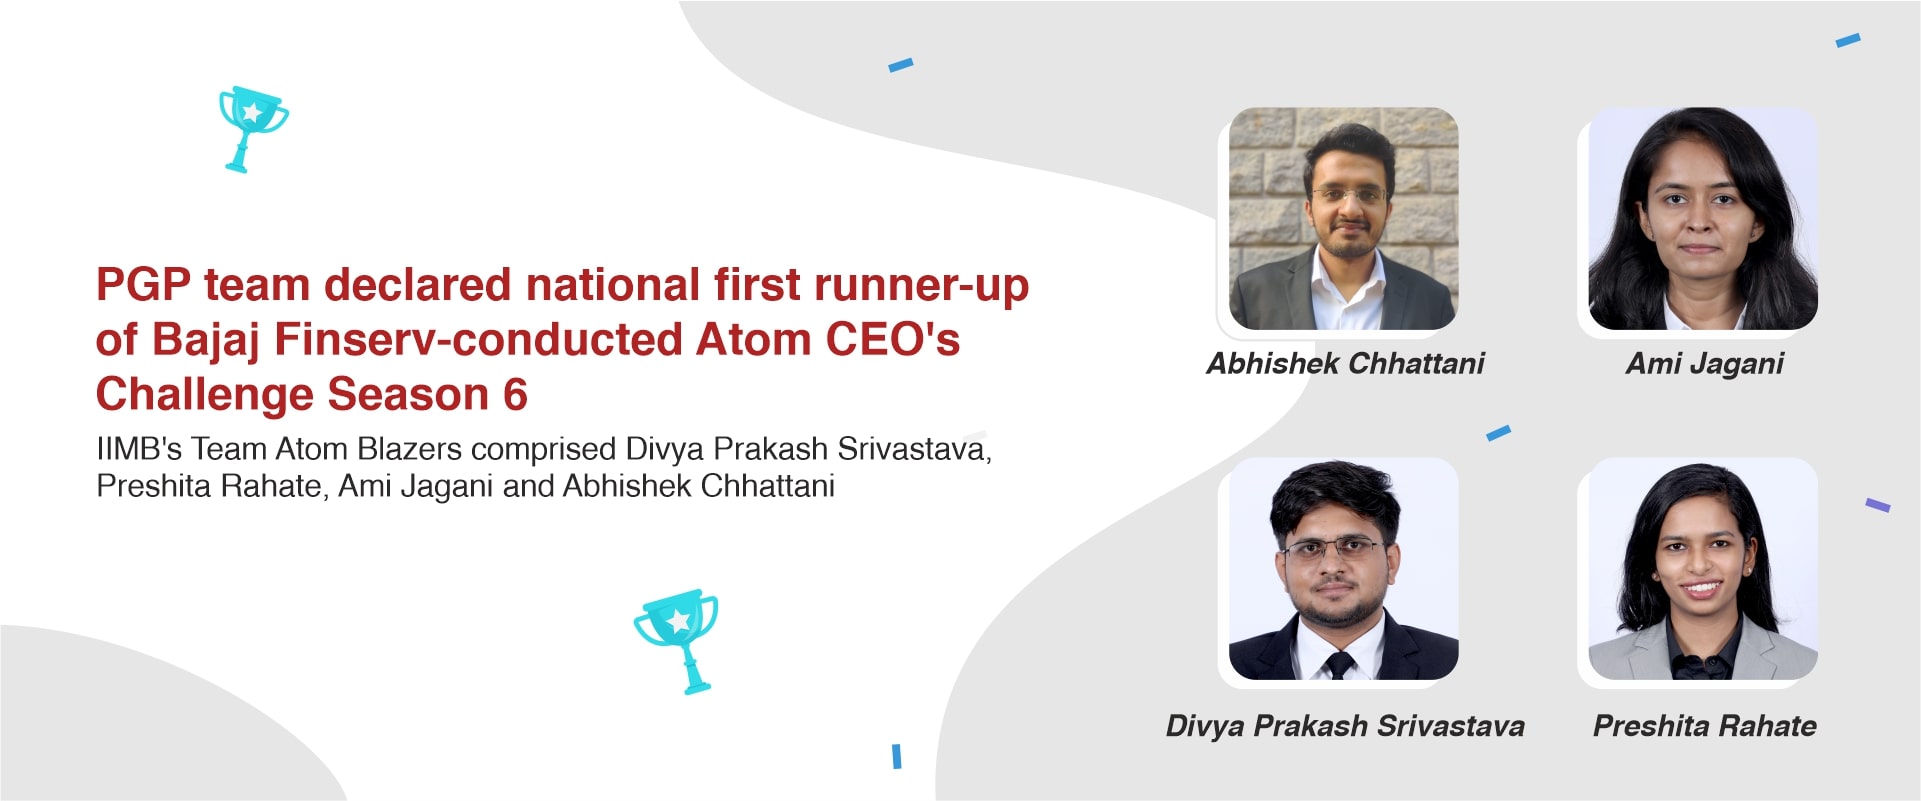 PGP team declared national first runner-up of Bajaj Finserv-conducted Atom CEO's Challenge Season 6